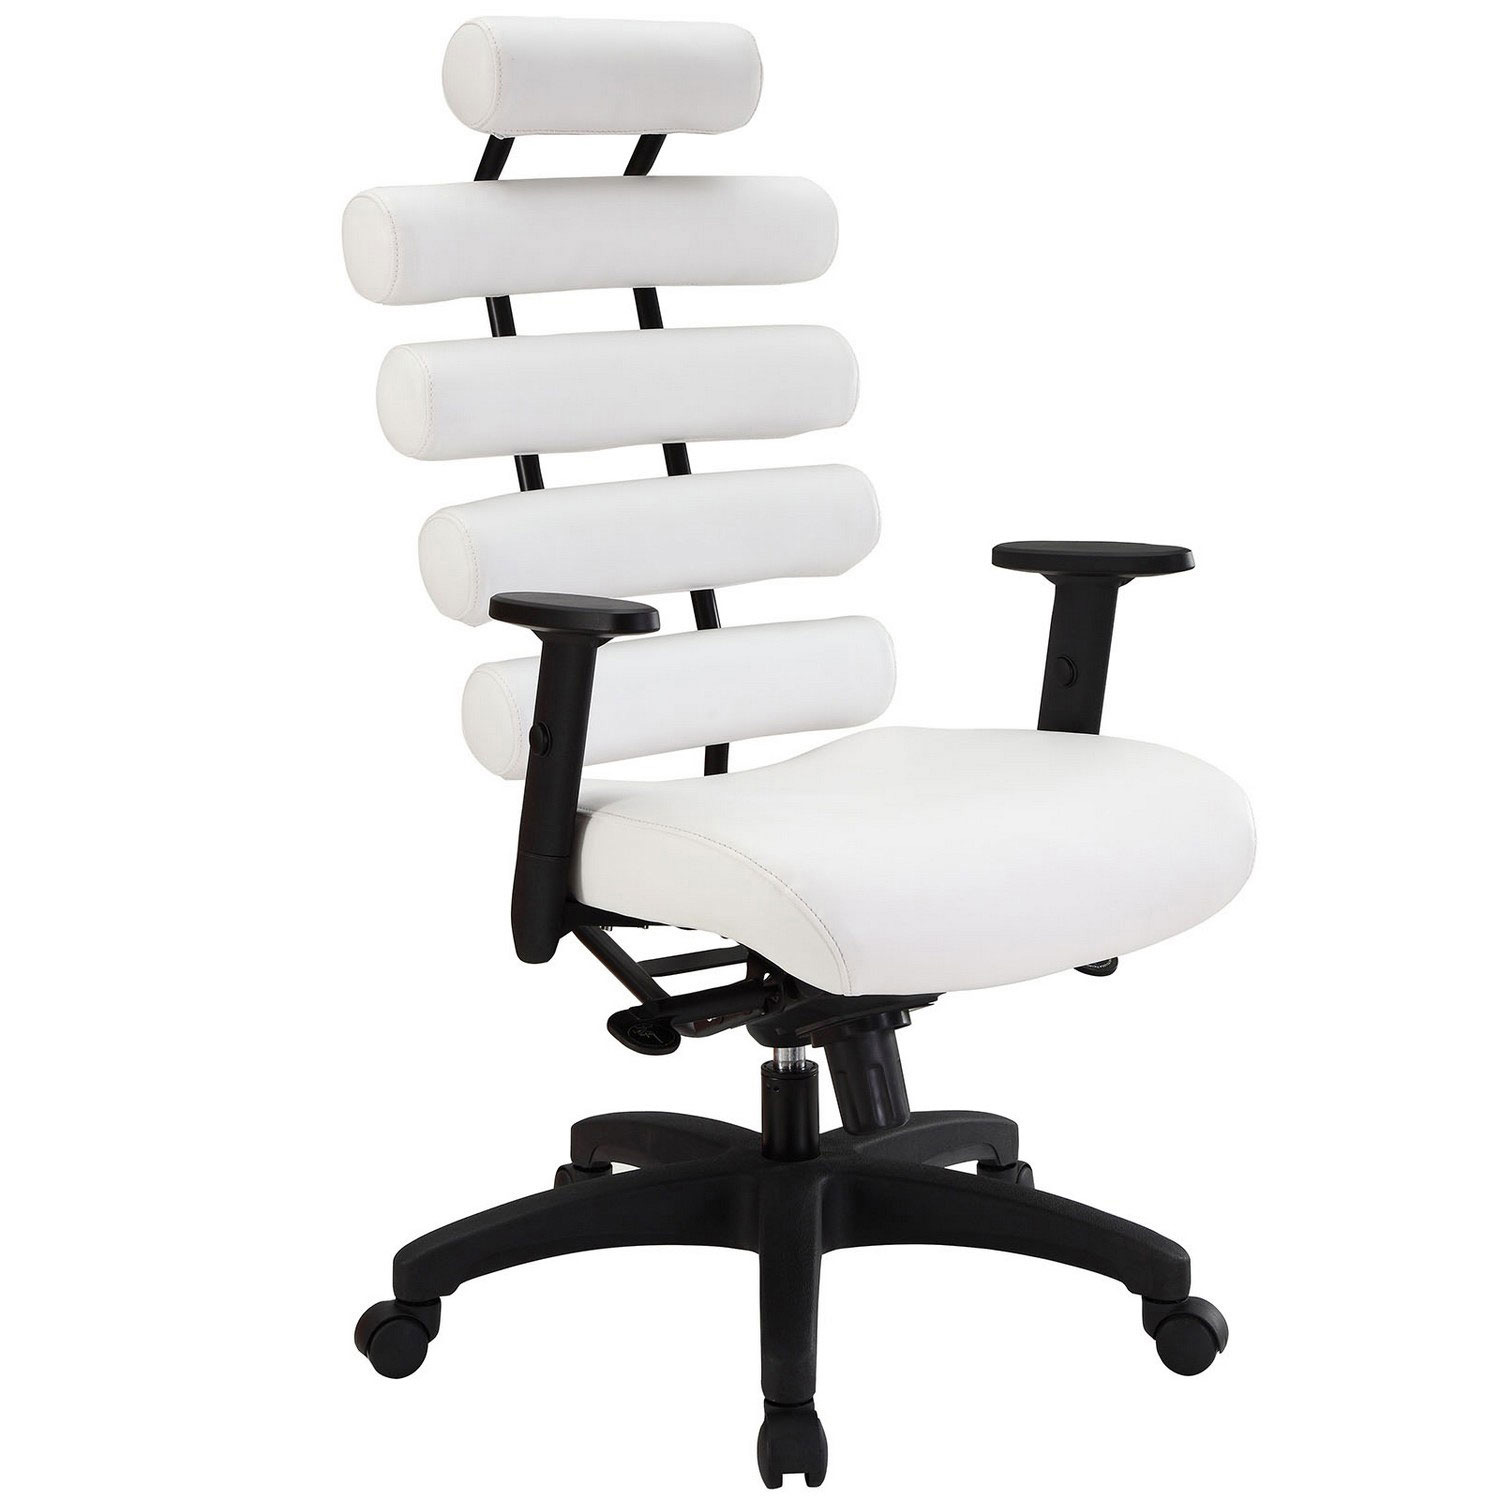 Modway Pillow Office Chair - White